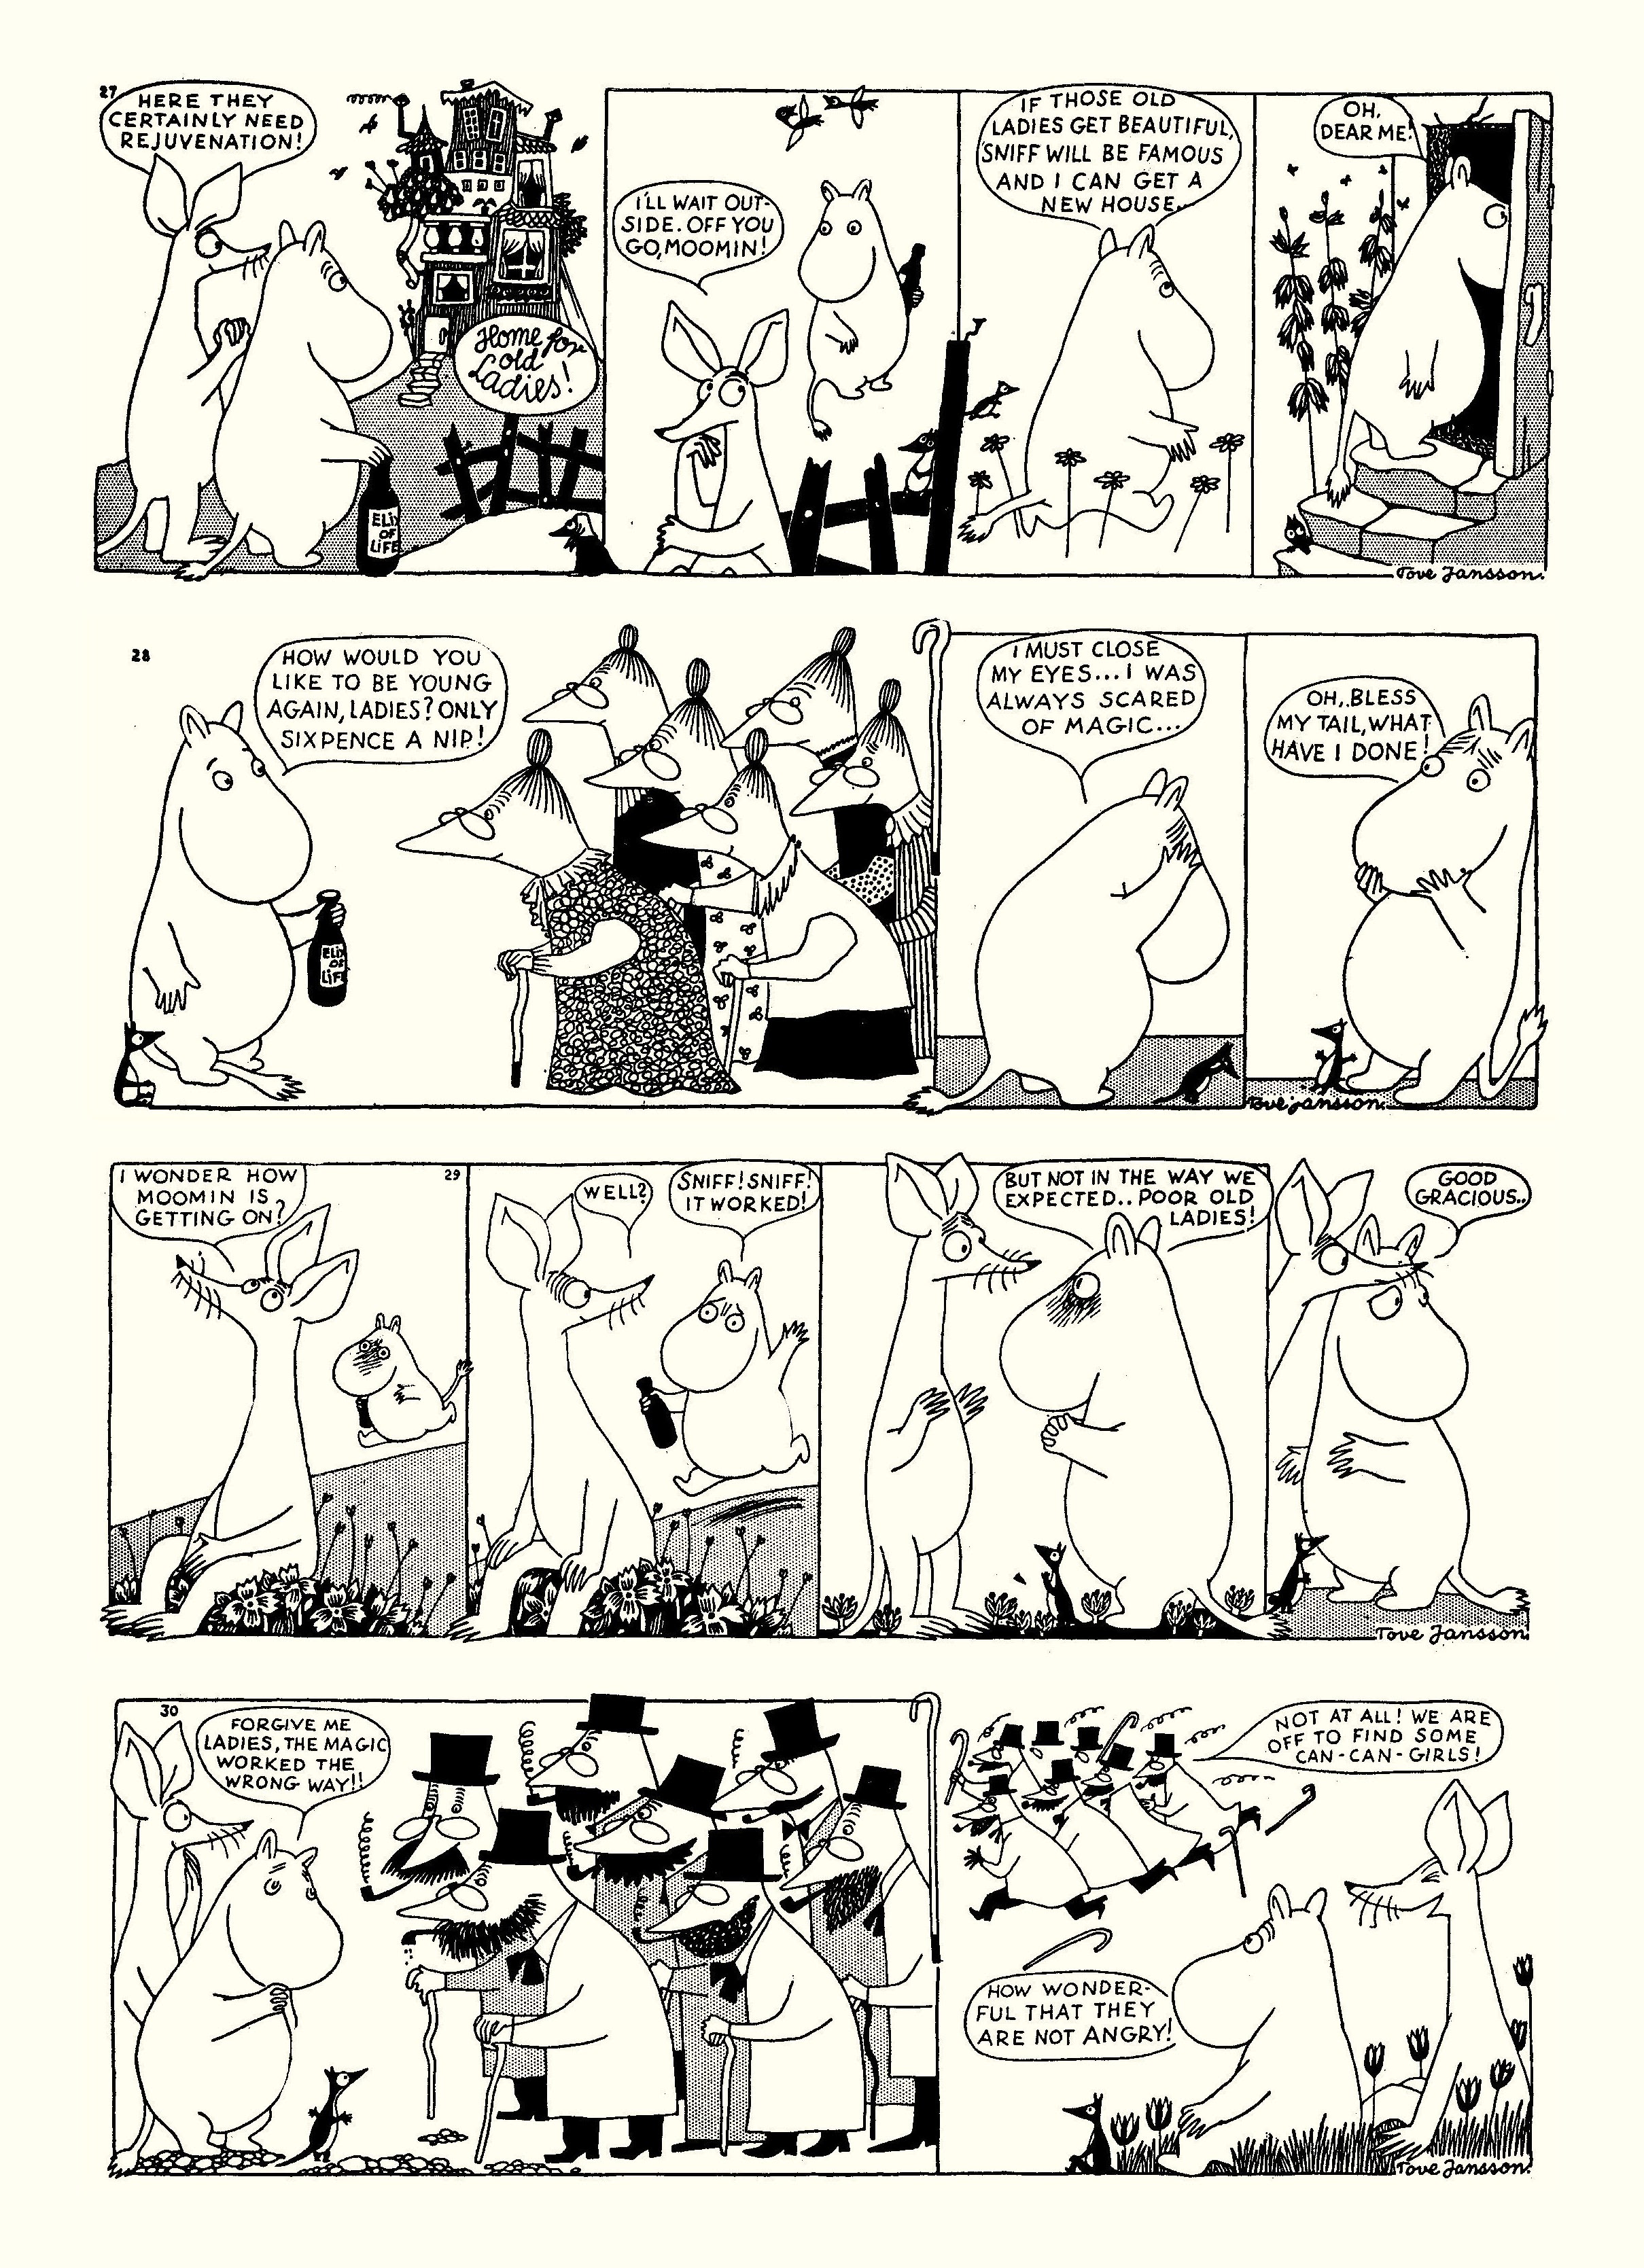 Read online Moomin: The Complete Tove Jansson Comic Strip comic -  Issue # TPB 1 - 13